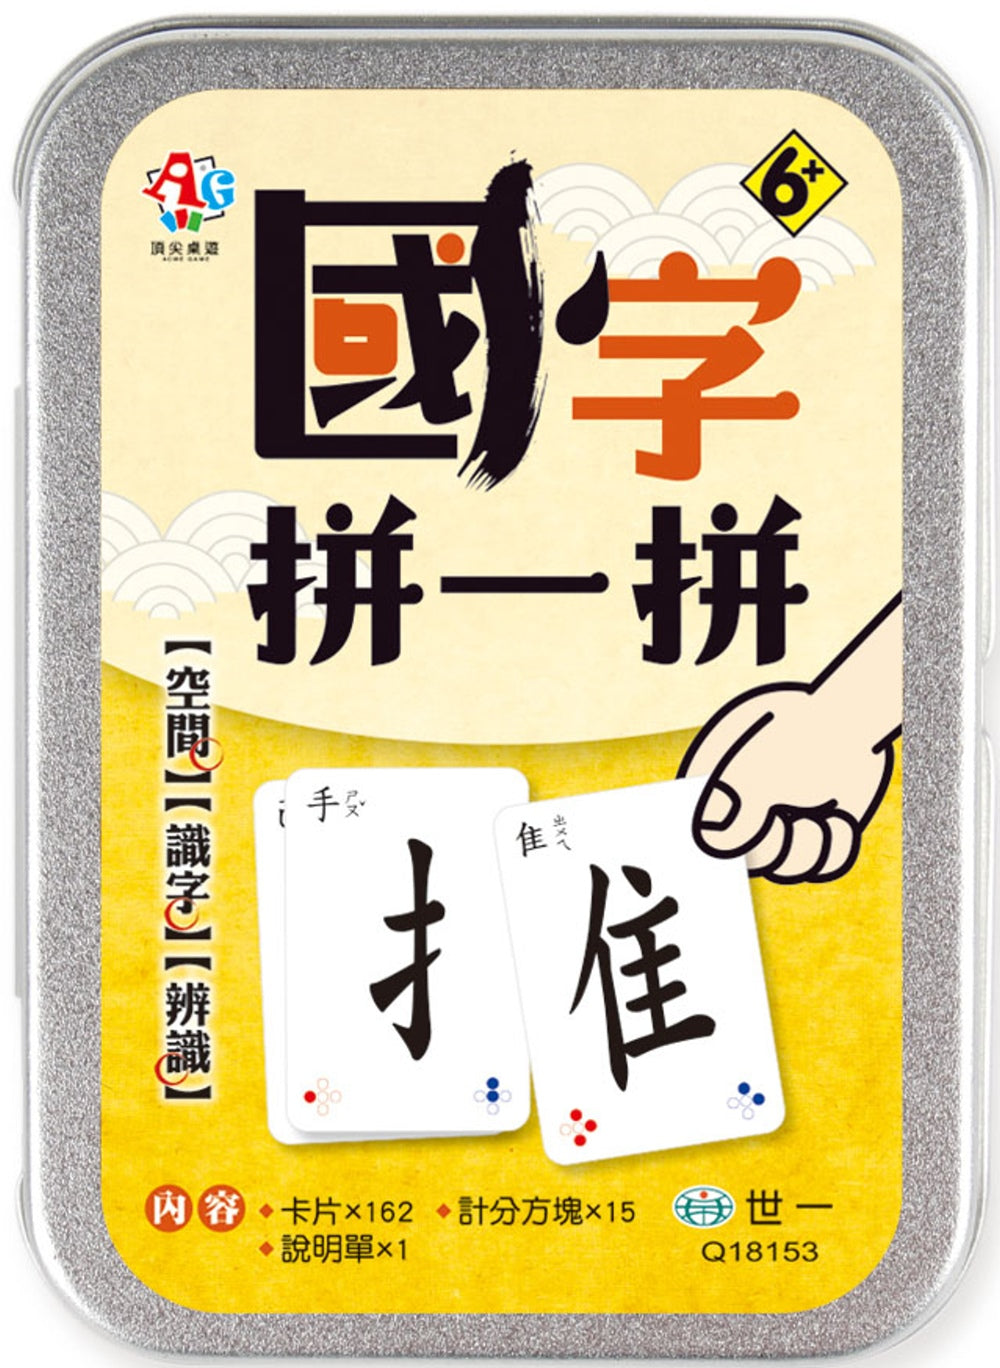 Chinese Character Radical Matching Card Game (Steelbox) • 國字拼一拼桌上遊戲